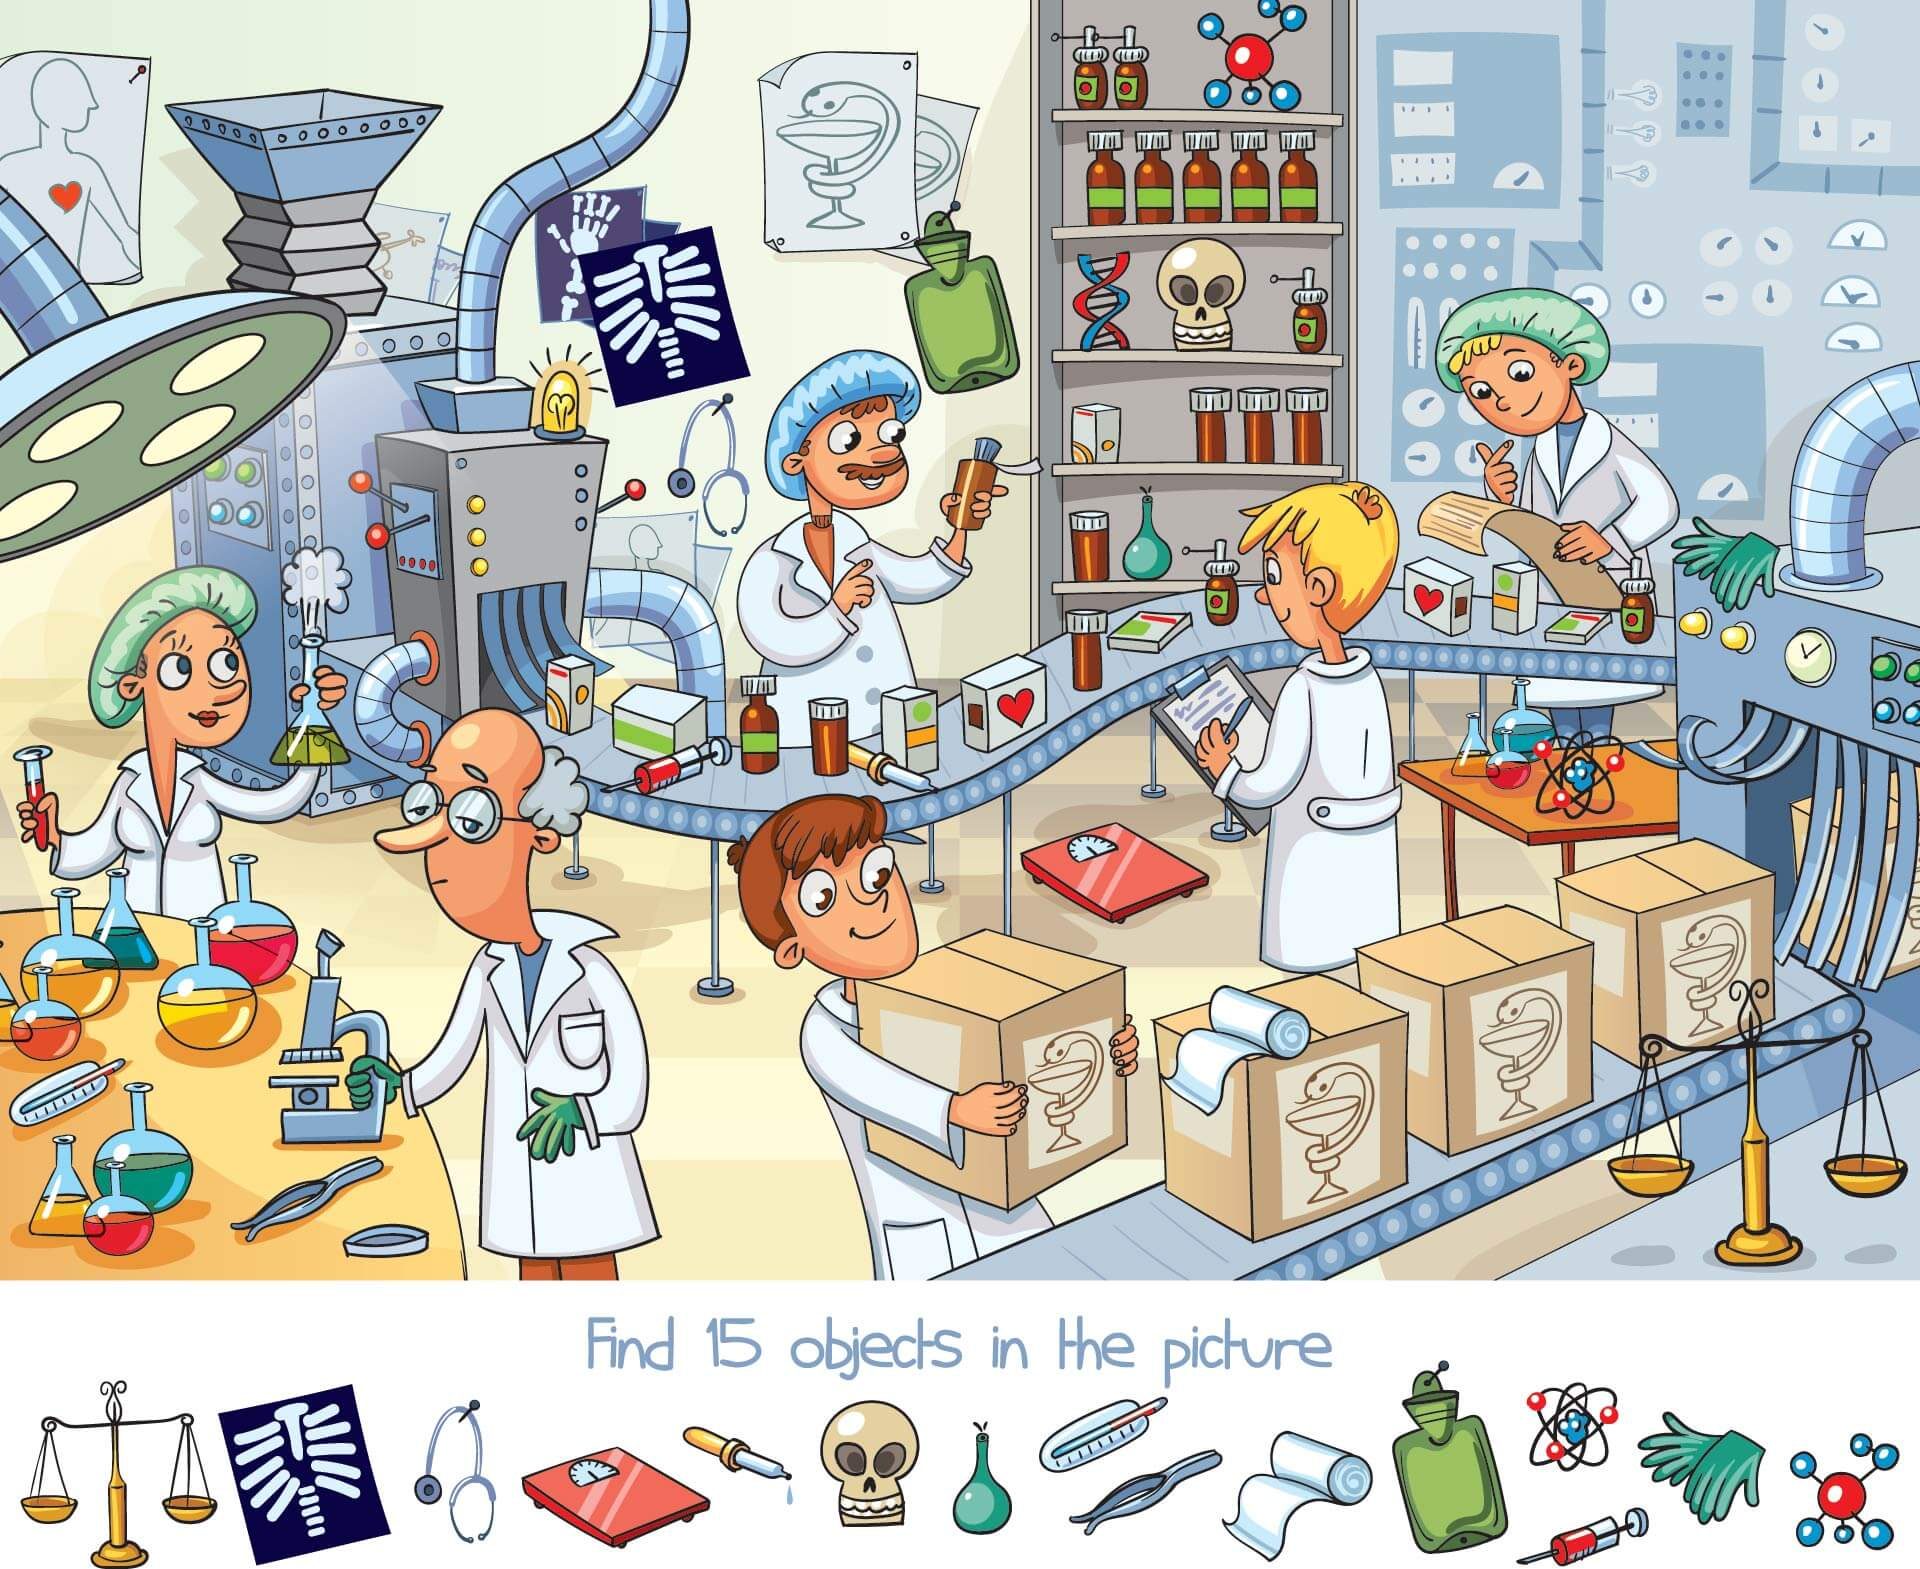 Can You Find the 15 Objects Hidden in This Picture? | Reader's Digest1920 x 1569